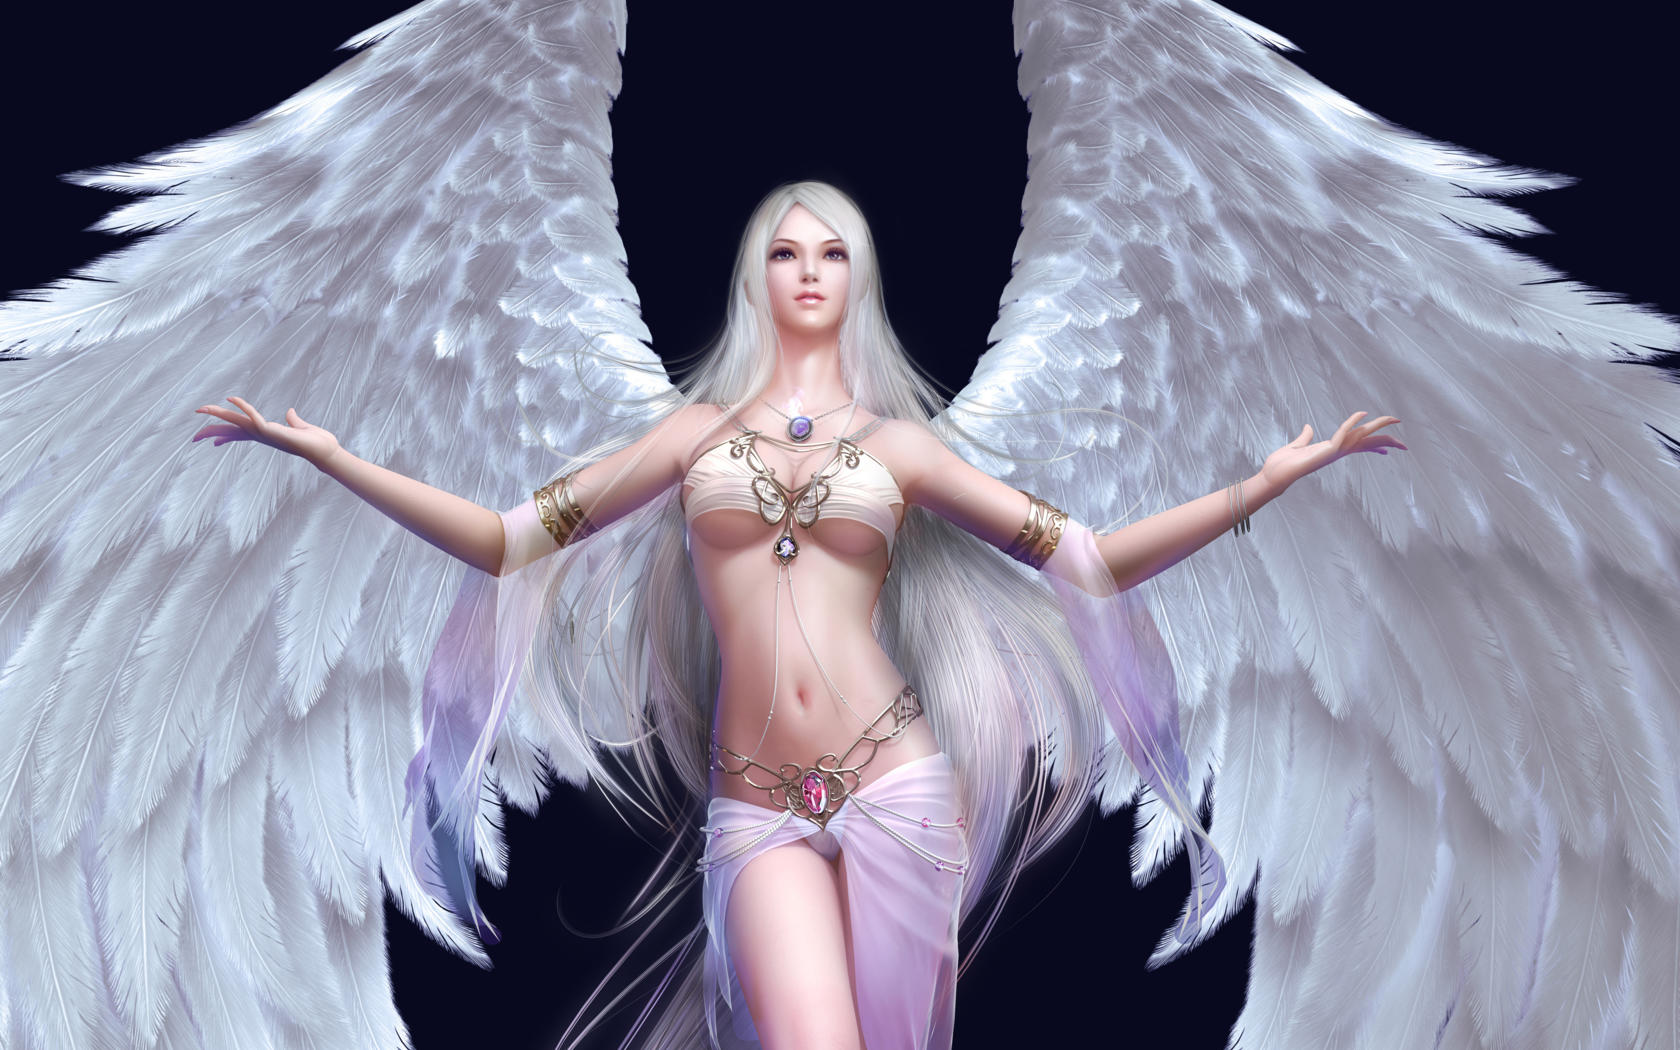 Anime Angel Girl Porn - Download photo 1680x1050, 3d vector girl, fantasy, anime, erotic, angel,  blonde, skinny, delicious, sexy, perfect girl, widescreen cut, wings,  fantasy, non nude - ID: 146357